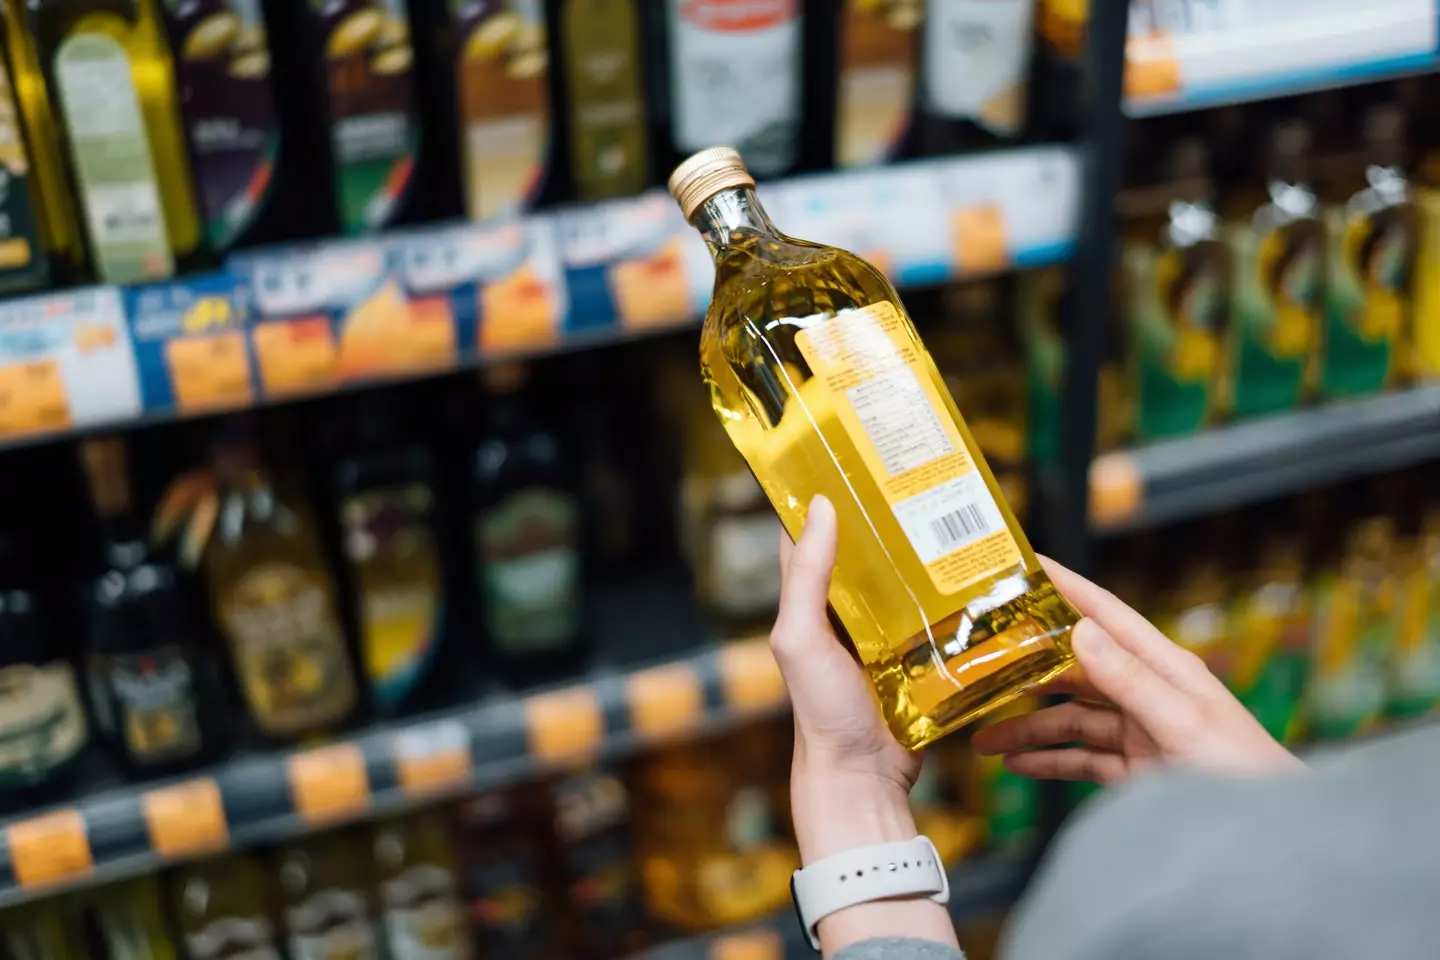 The price of olive oil is pretty shocking (D3sign / Getty Images)